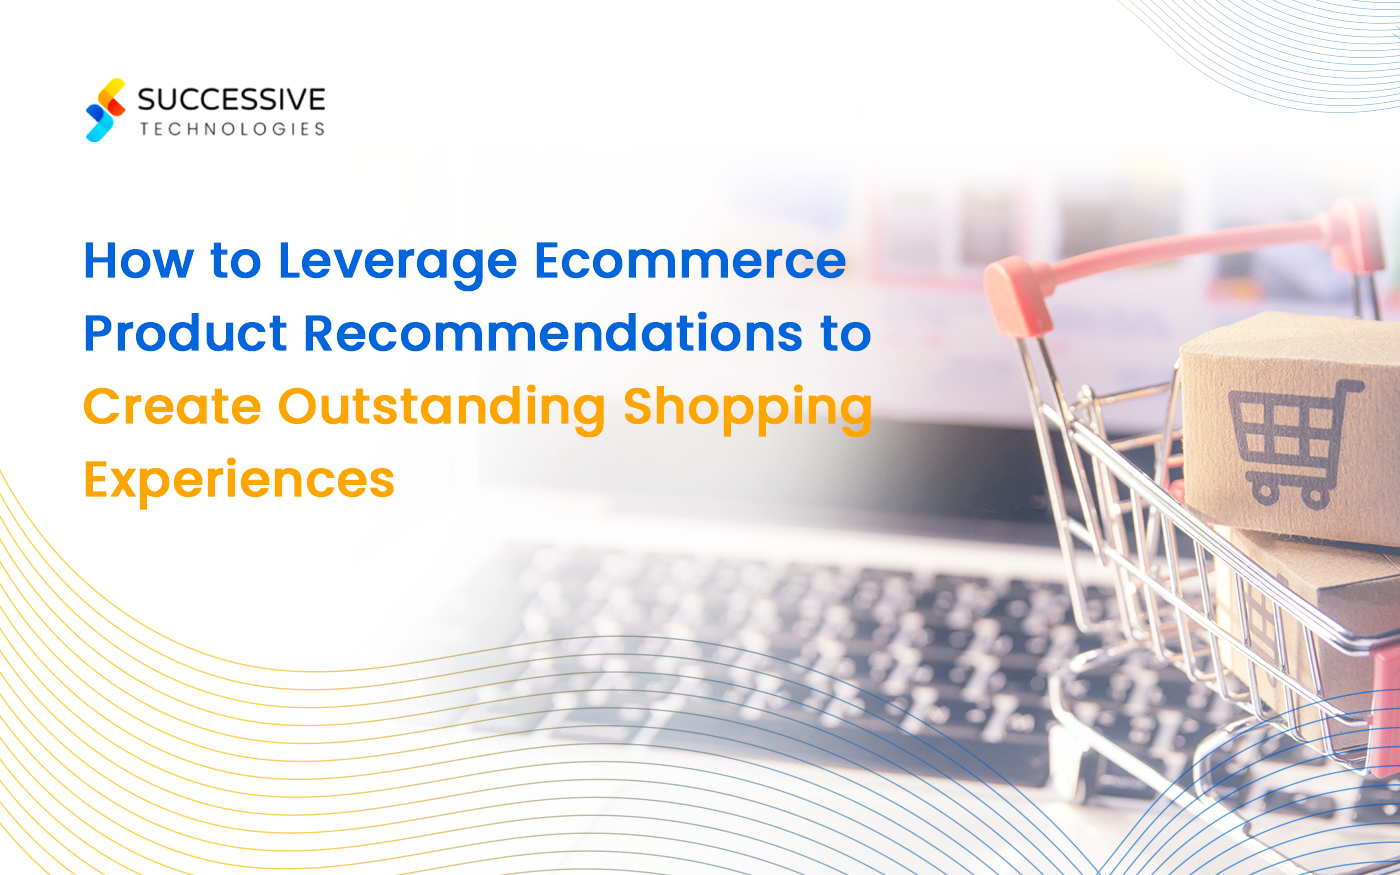 How to Leverage Ecommerce Product Recommendations to Create Outstanding Shopping Experiences